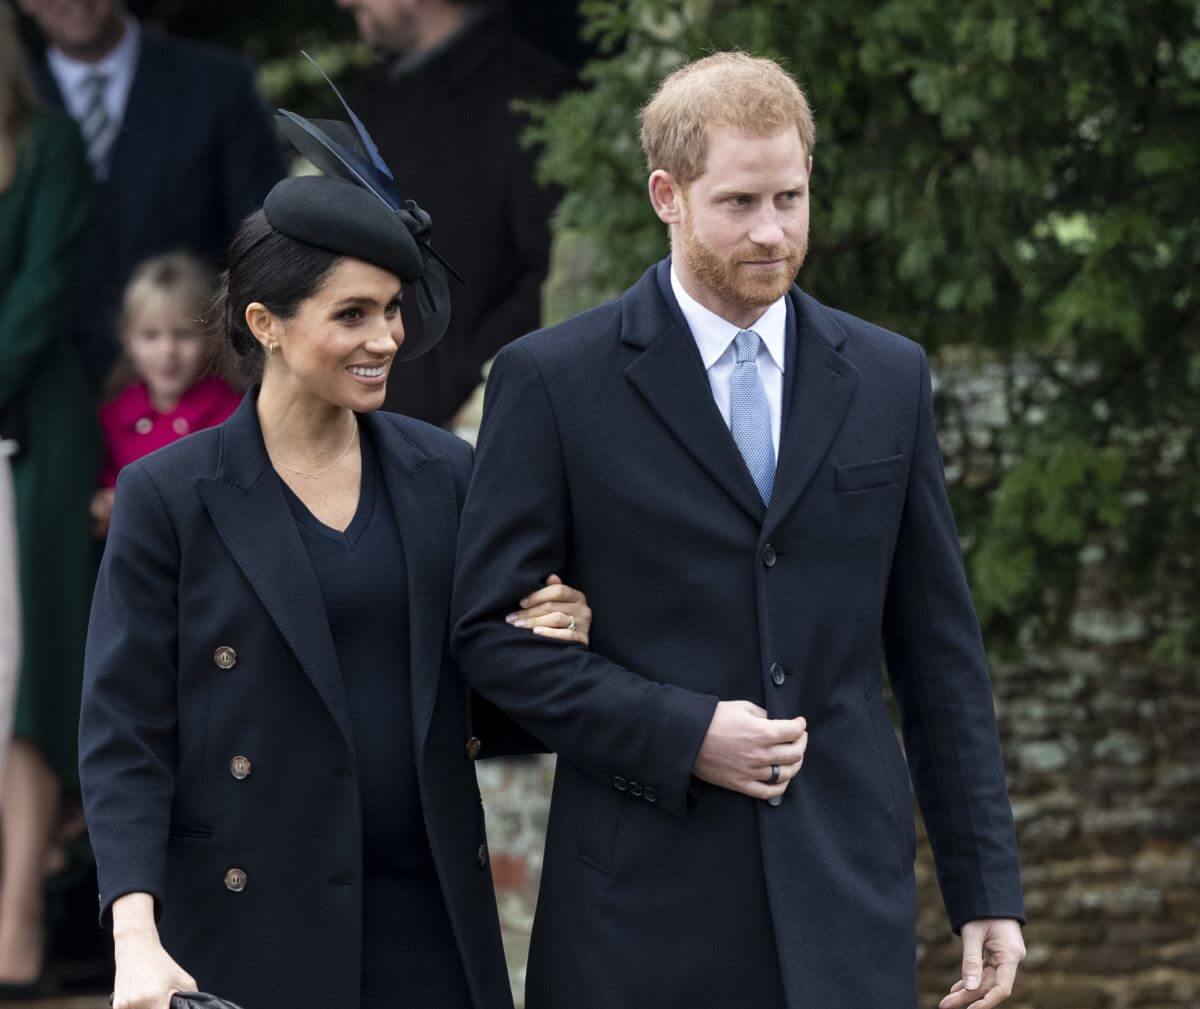 Meghan Markle and Prince Harry attend Christmas Day service at Church of St. Mary Magdalene in 2018